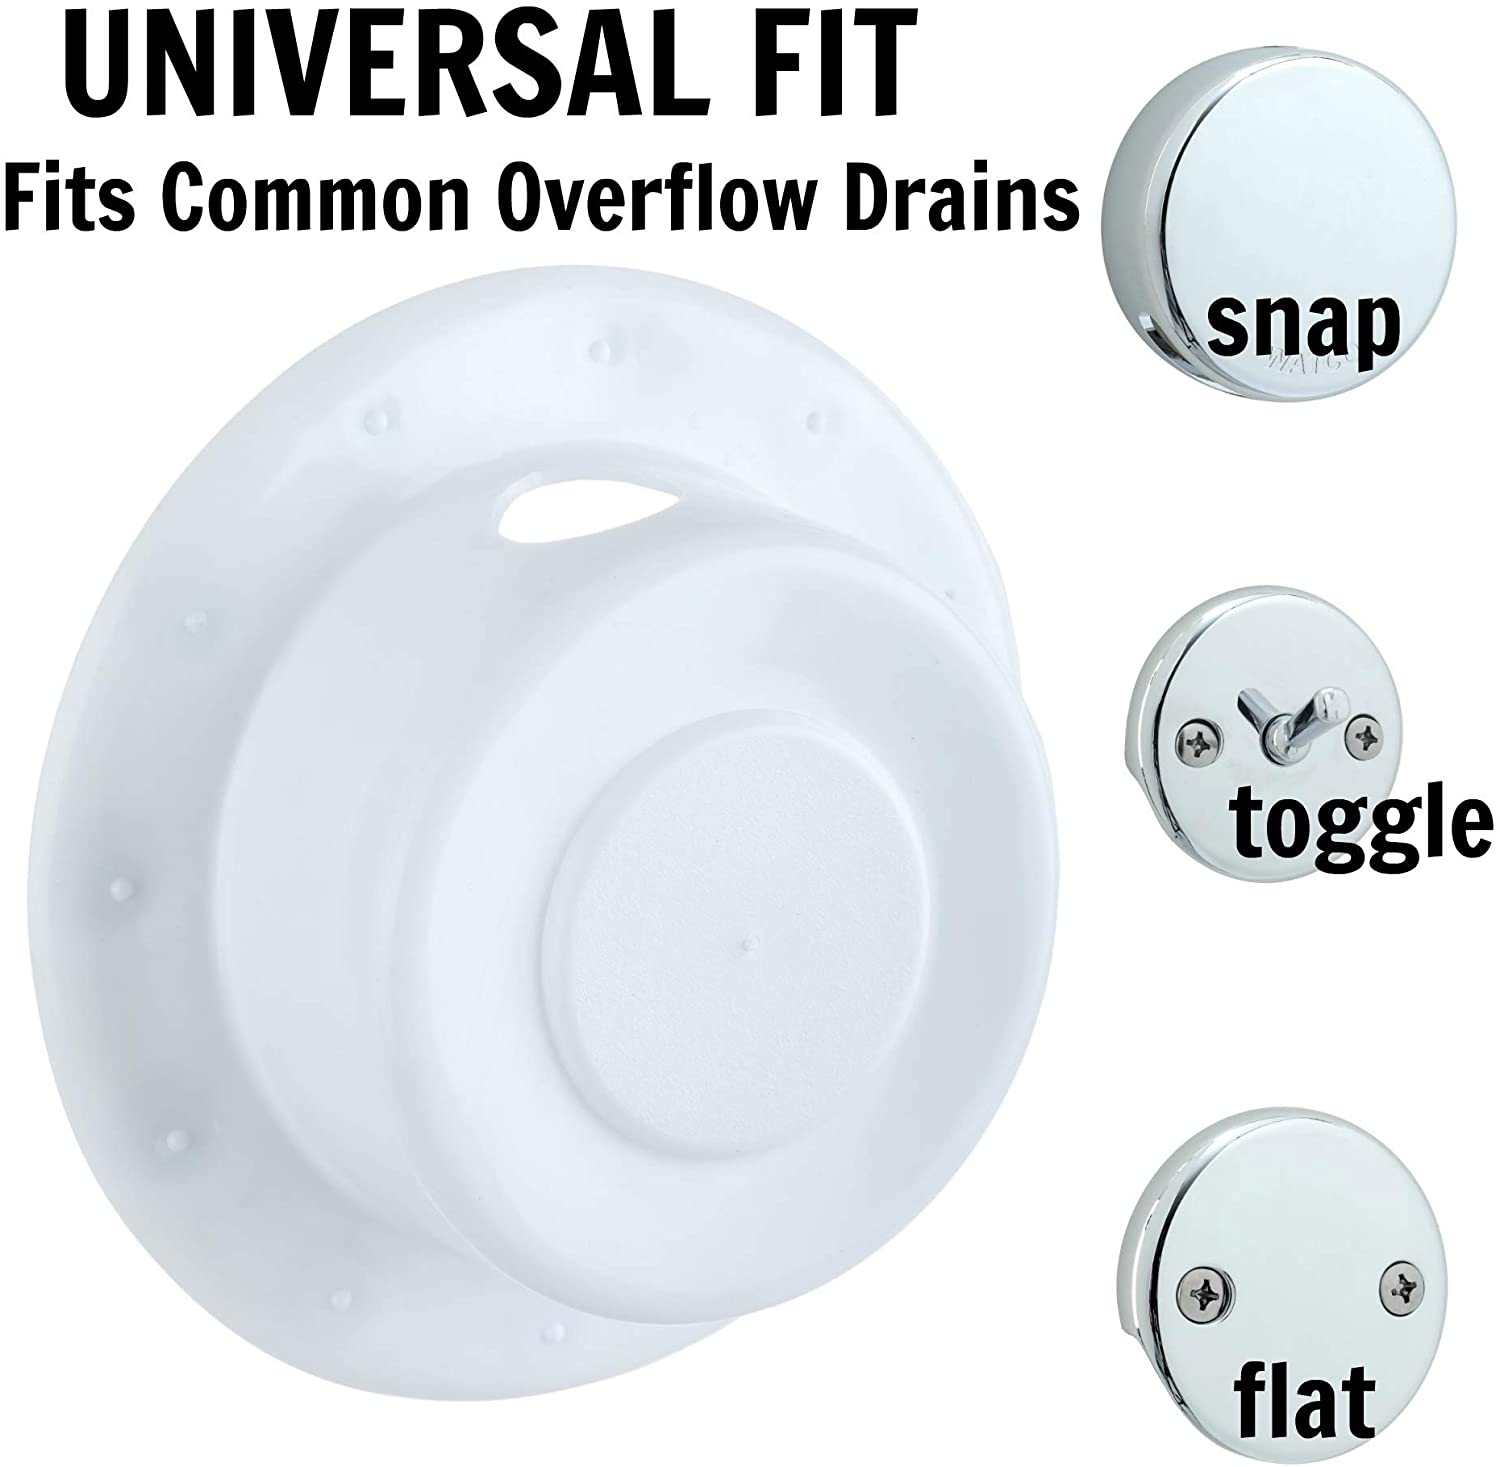 Overflow Drain Cover Gadgets